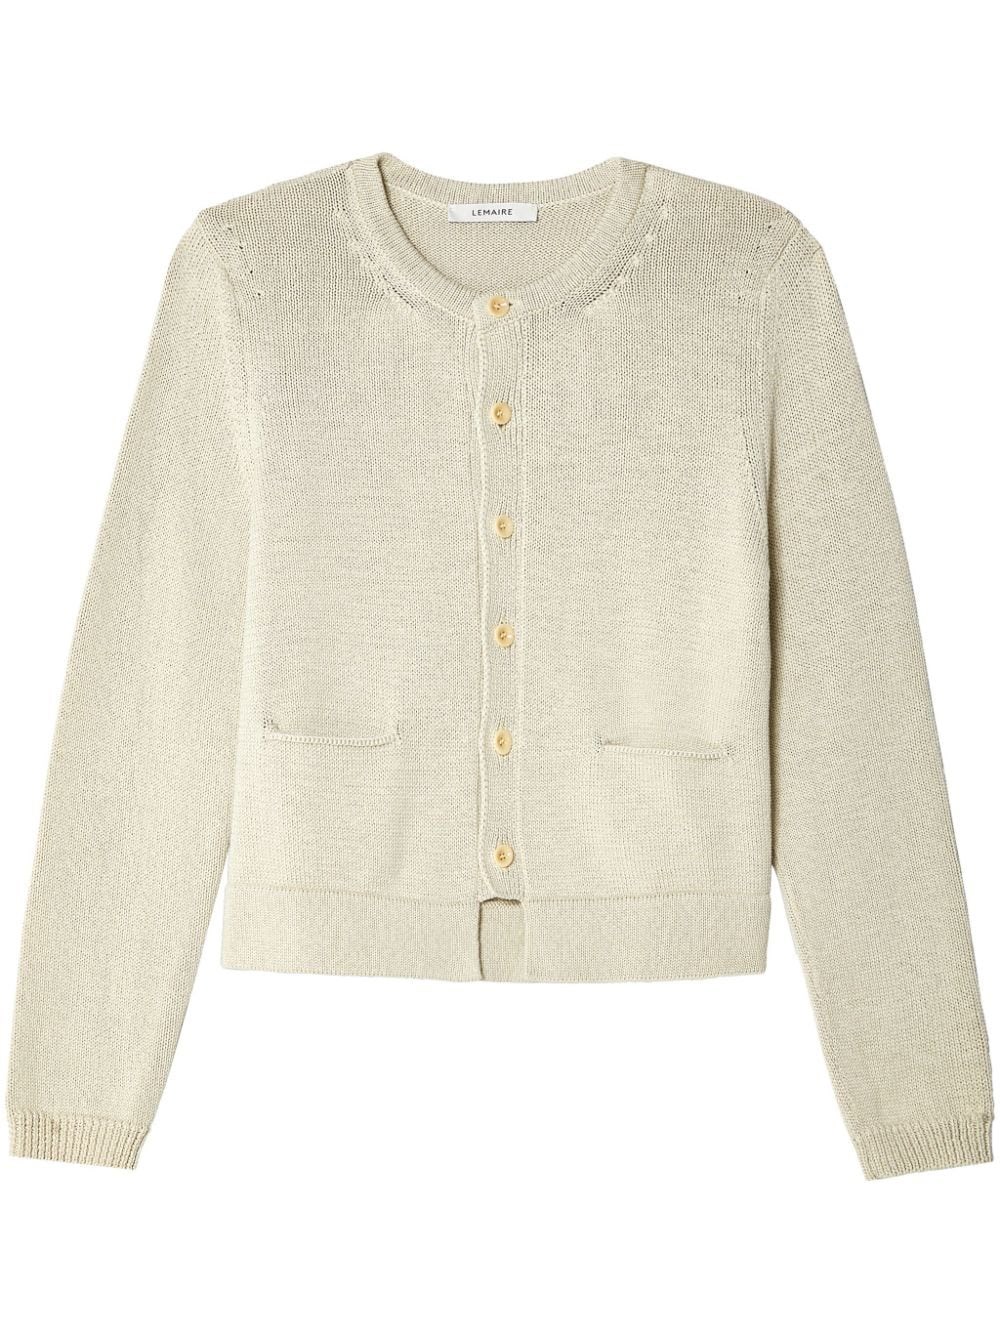 LEMAIRE CROPPED CARDIGAN